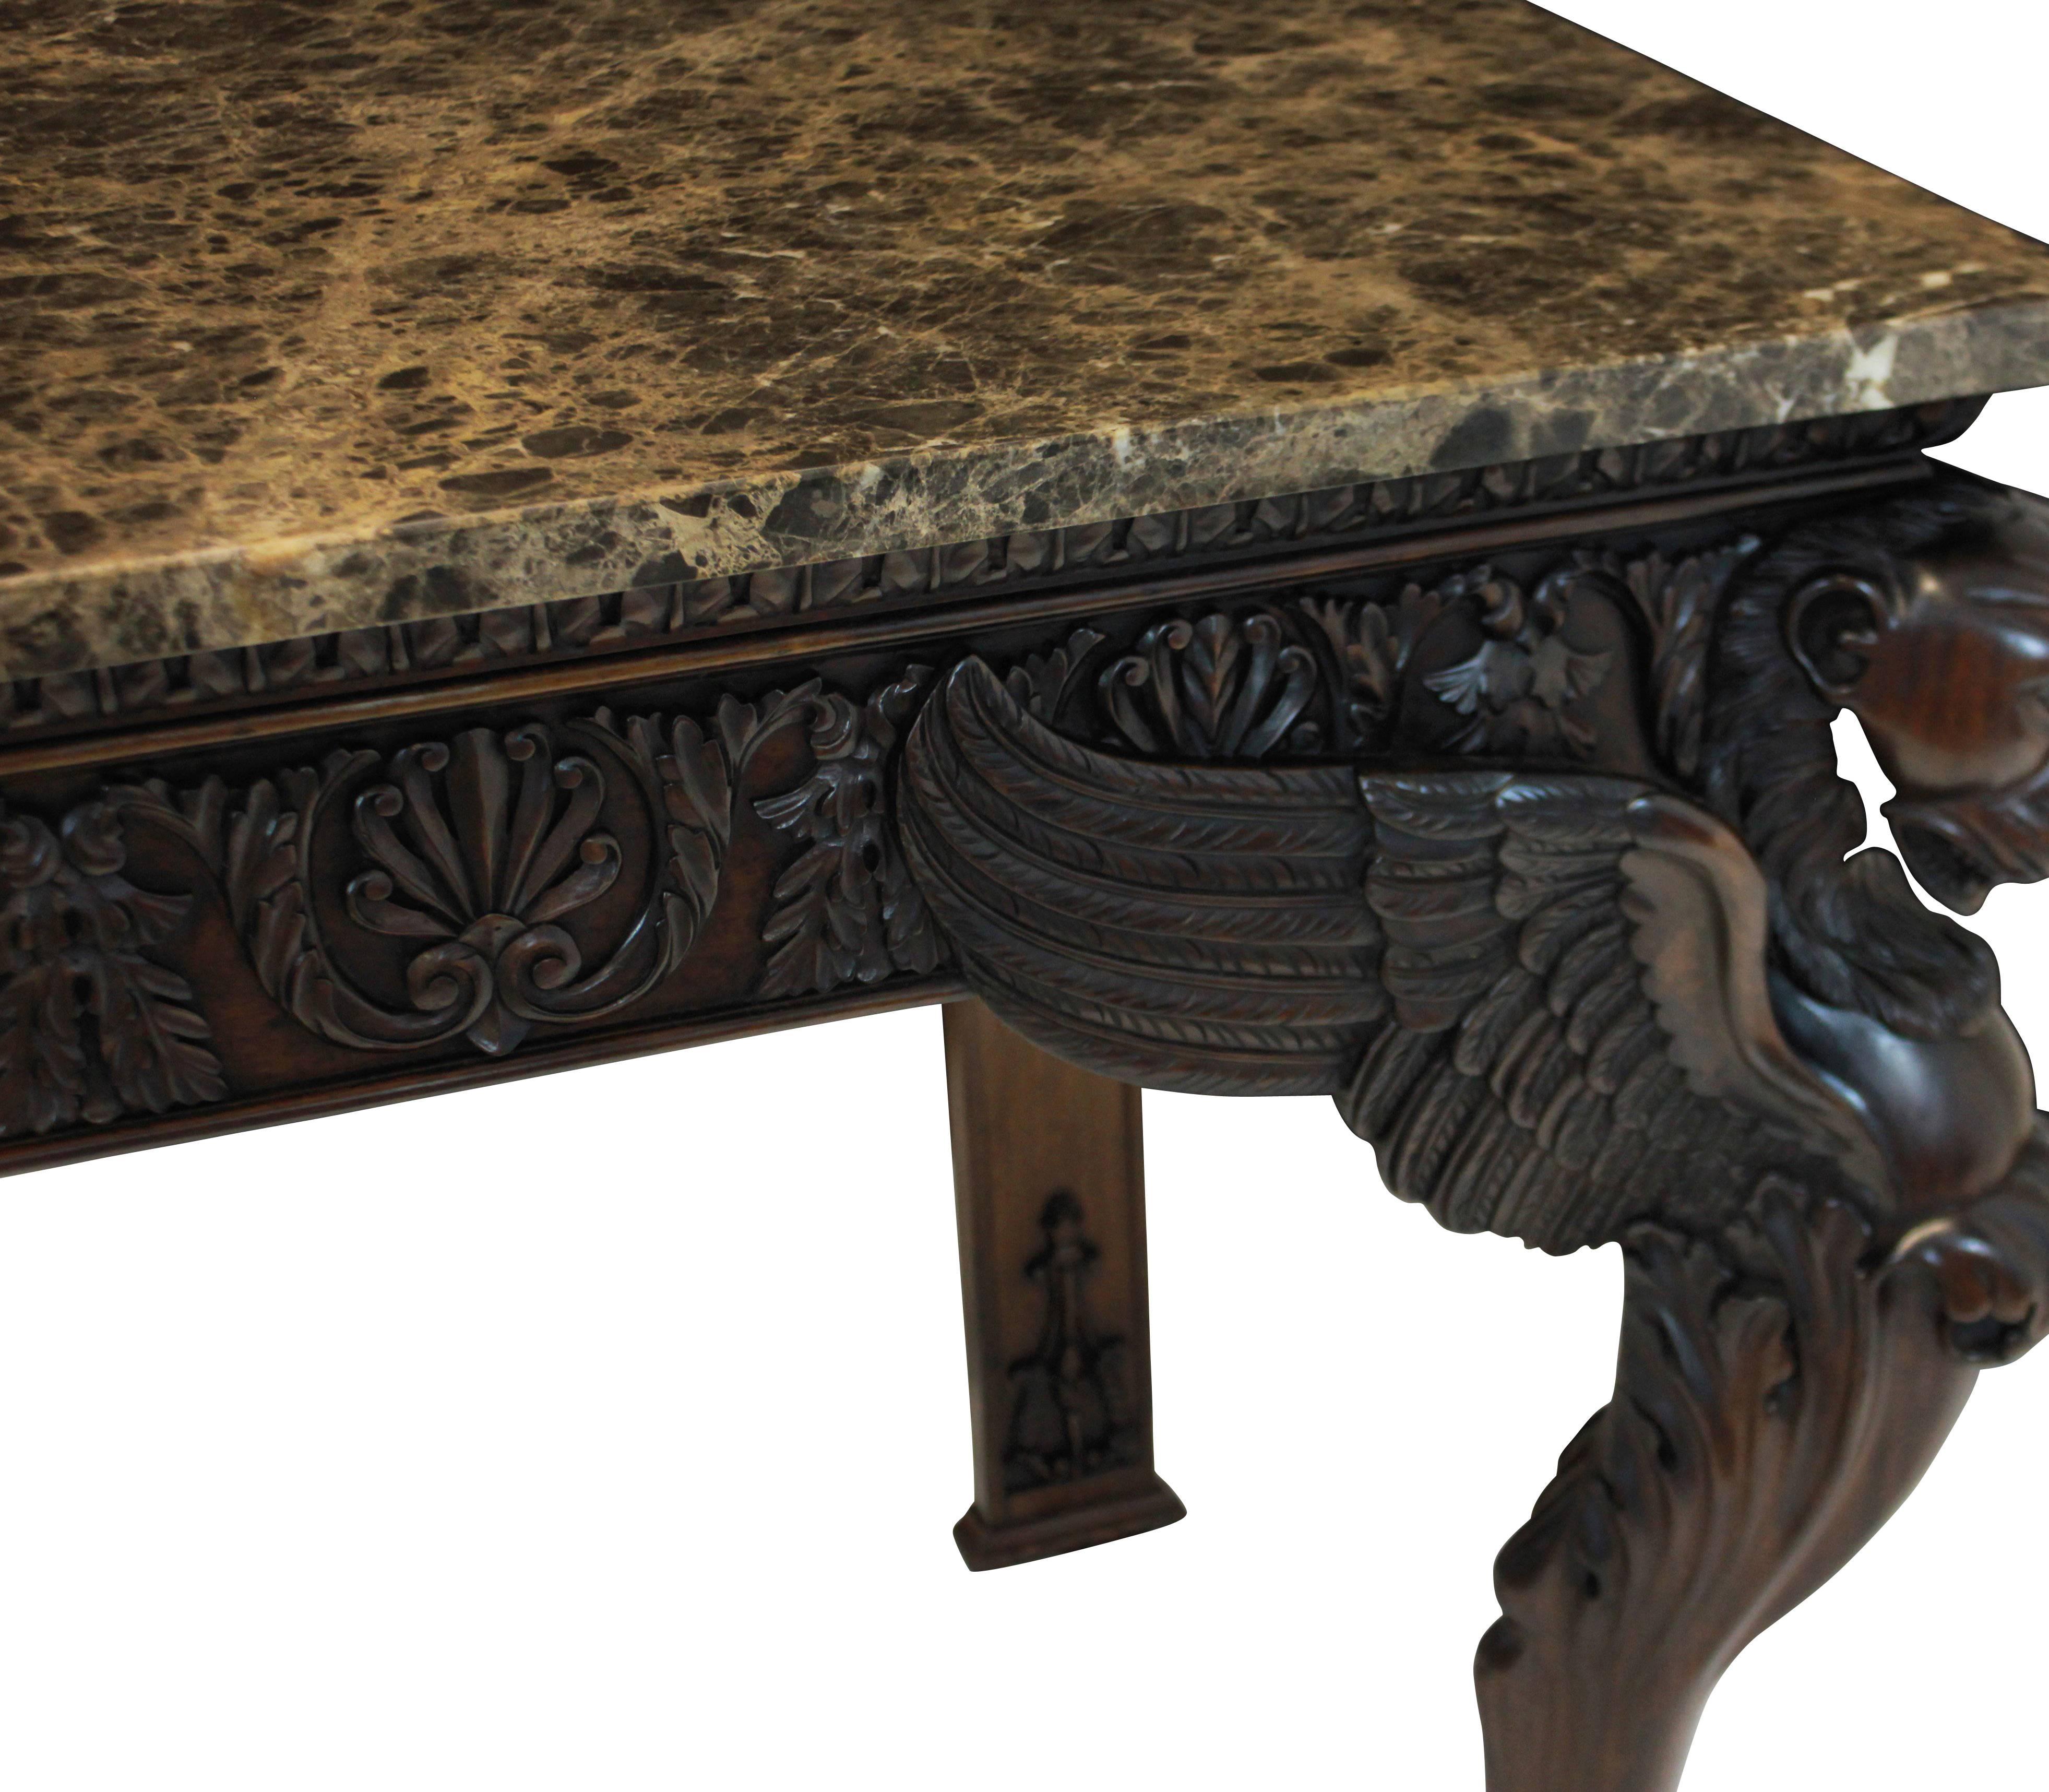 Apair of large English country house console tables of fine quality. Of beautifully carved mahogany in the early 18th century style, with winged beasts and intricately carved friezes with dark brown imperial marble tops.

 